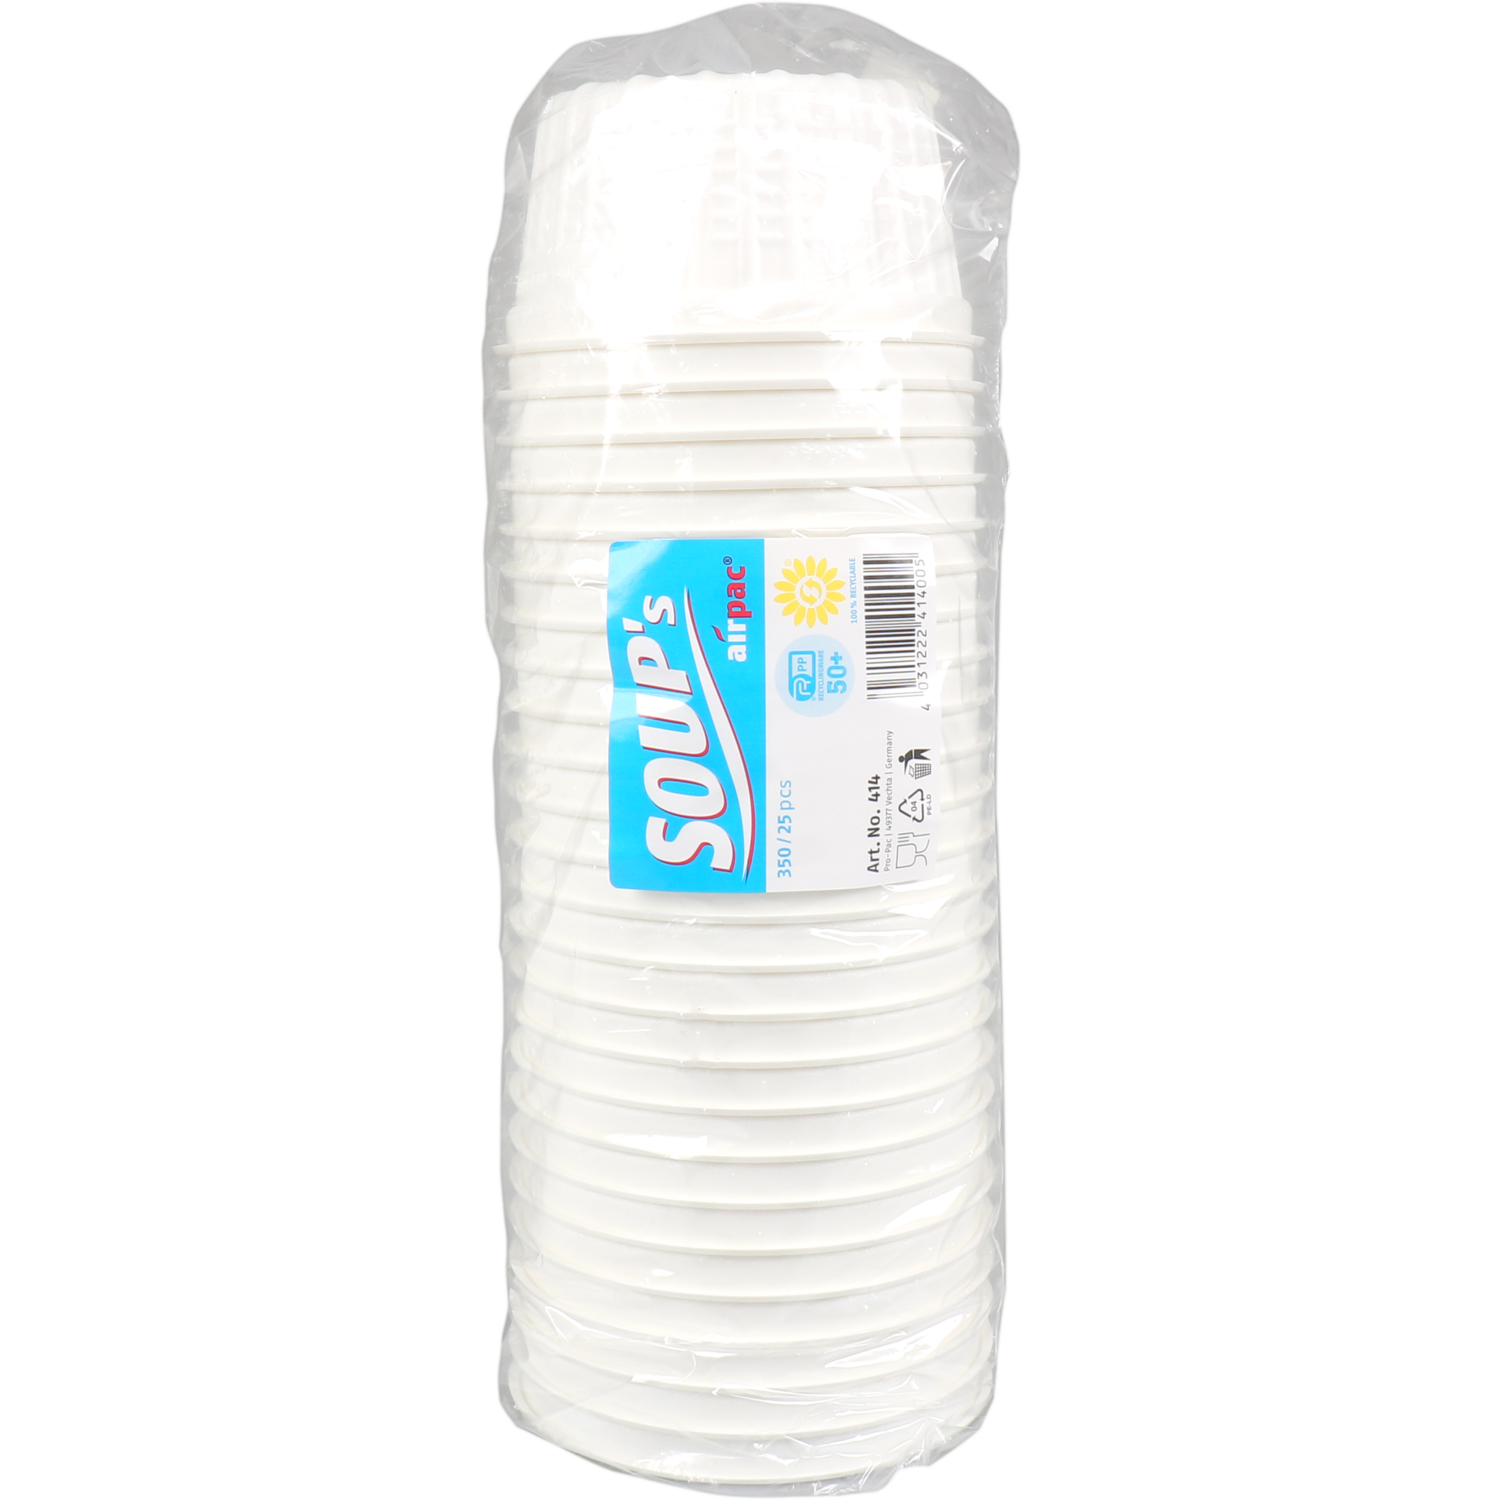  Soepbeker, PP-thermo, 350ml, wit 2